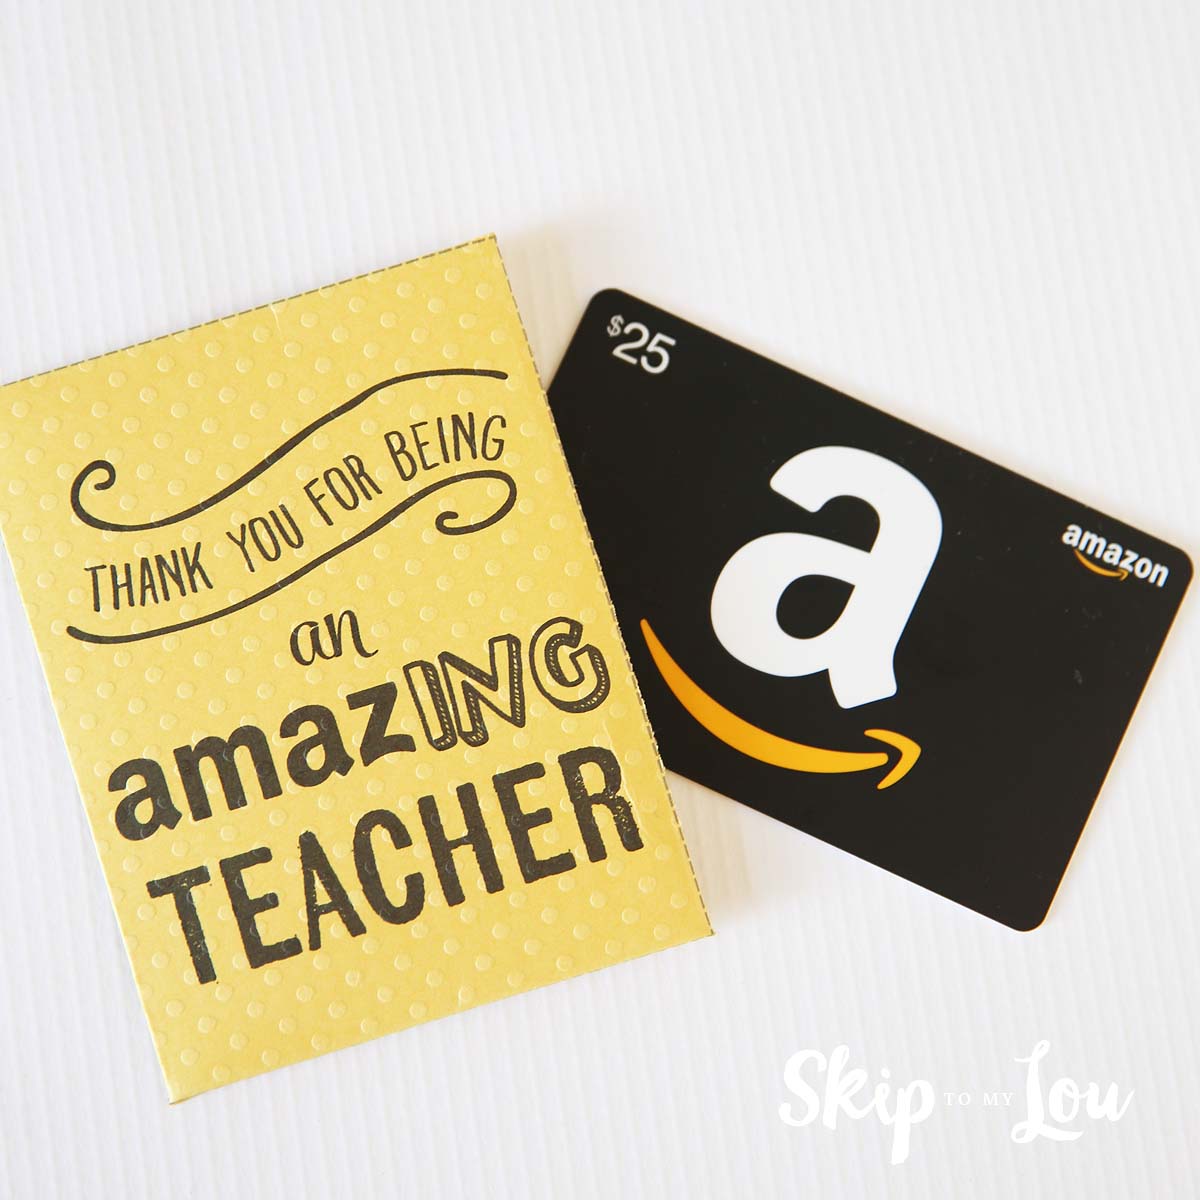 End of the year teacher gifts | Skip To My Lou